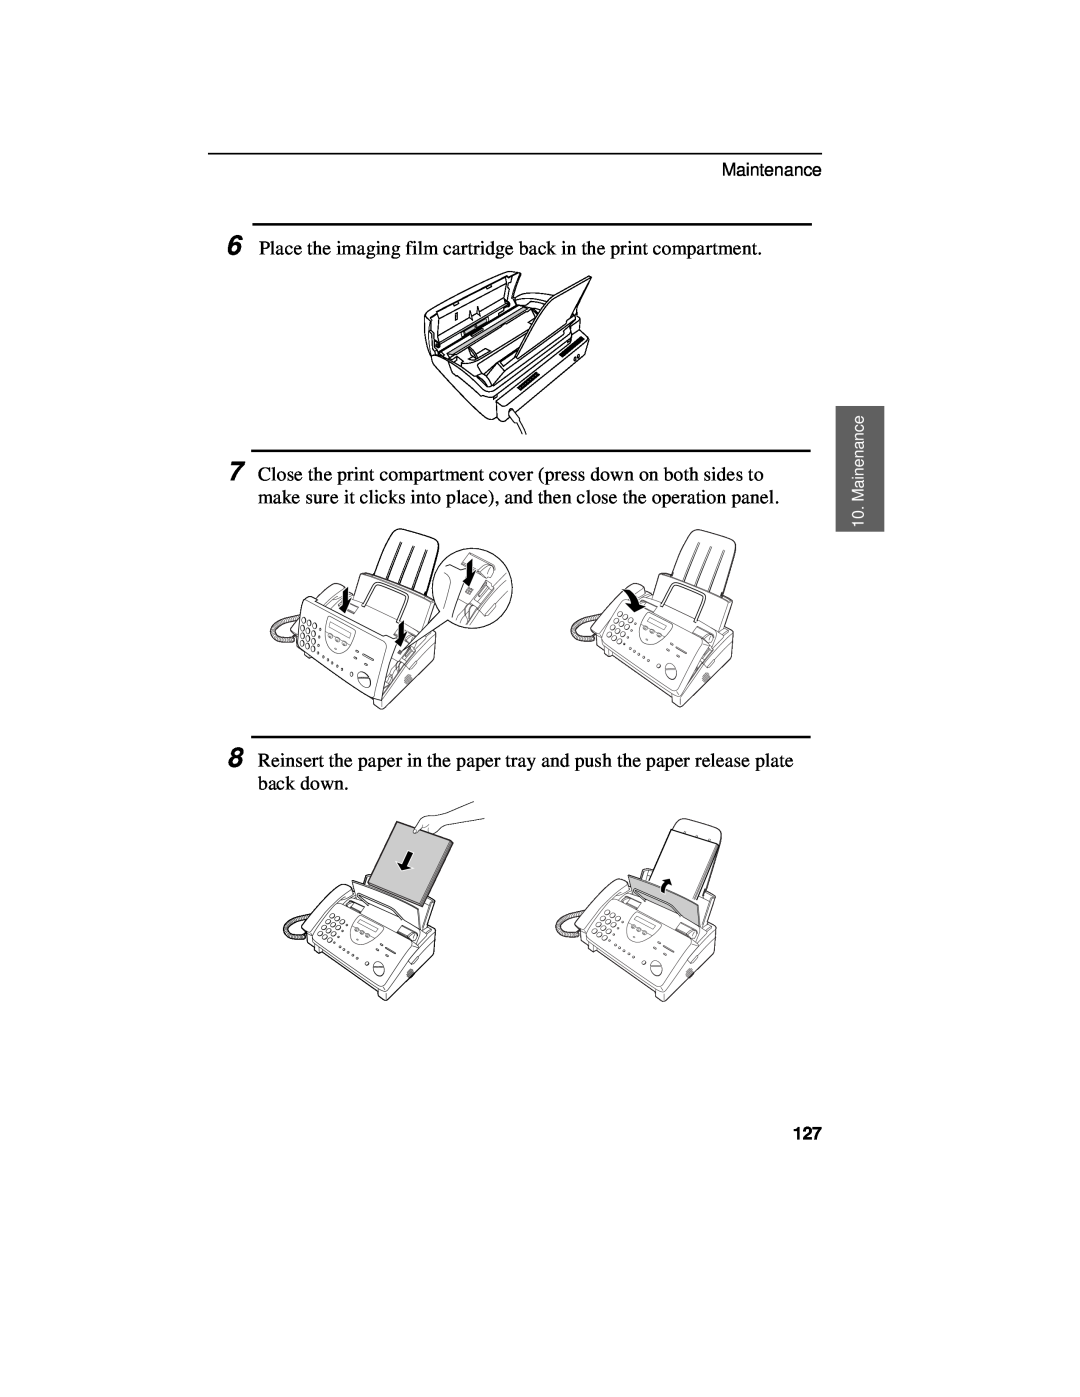 Sharp UX-460 operation manual Place the imaging film cartridge back in the print compartment 